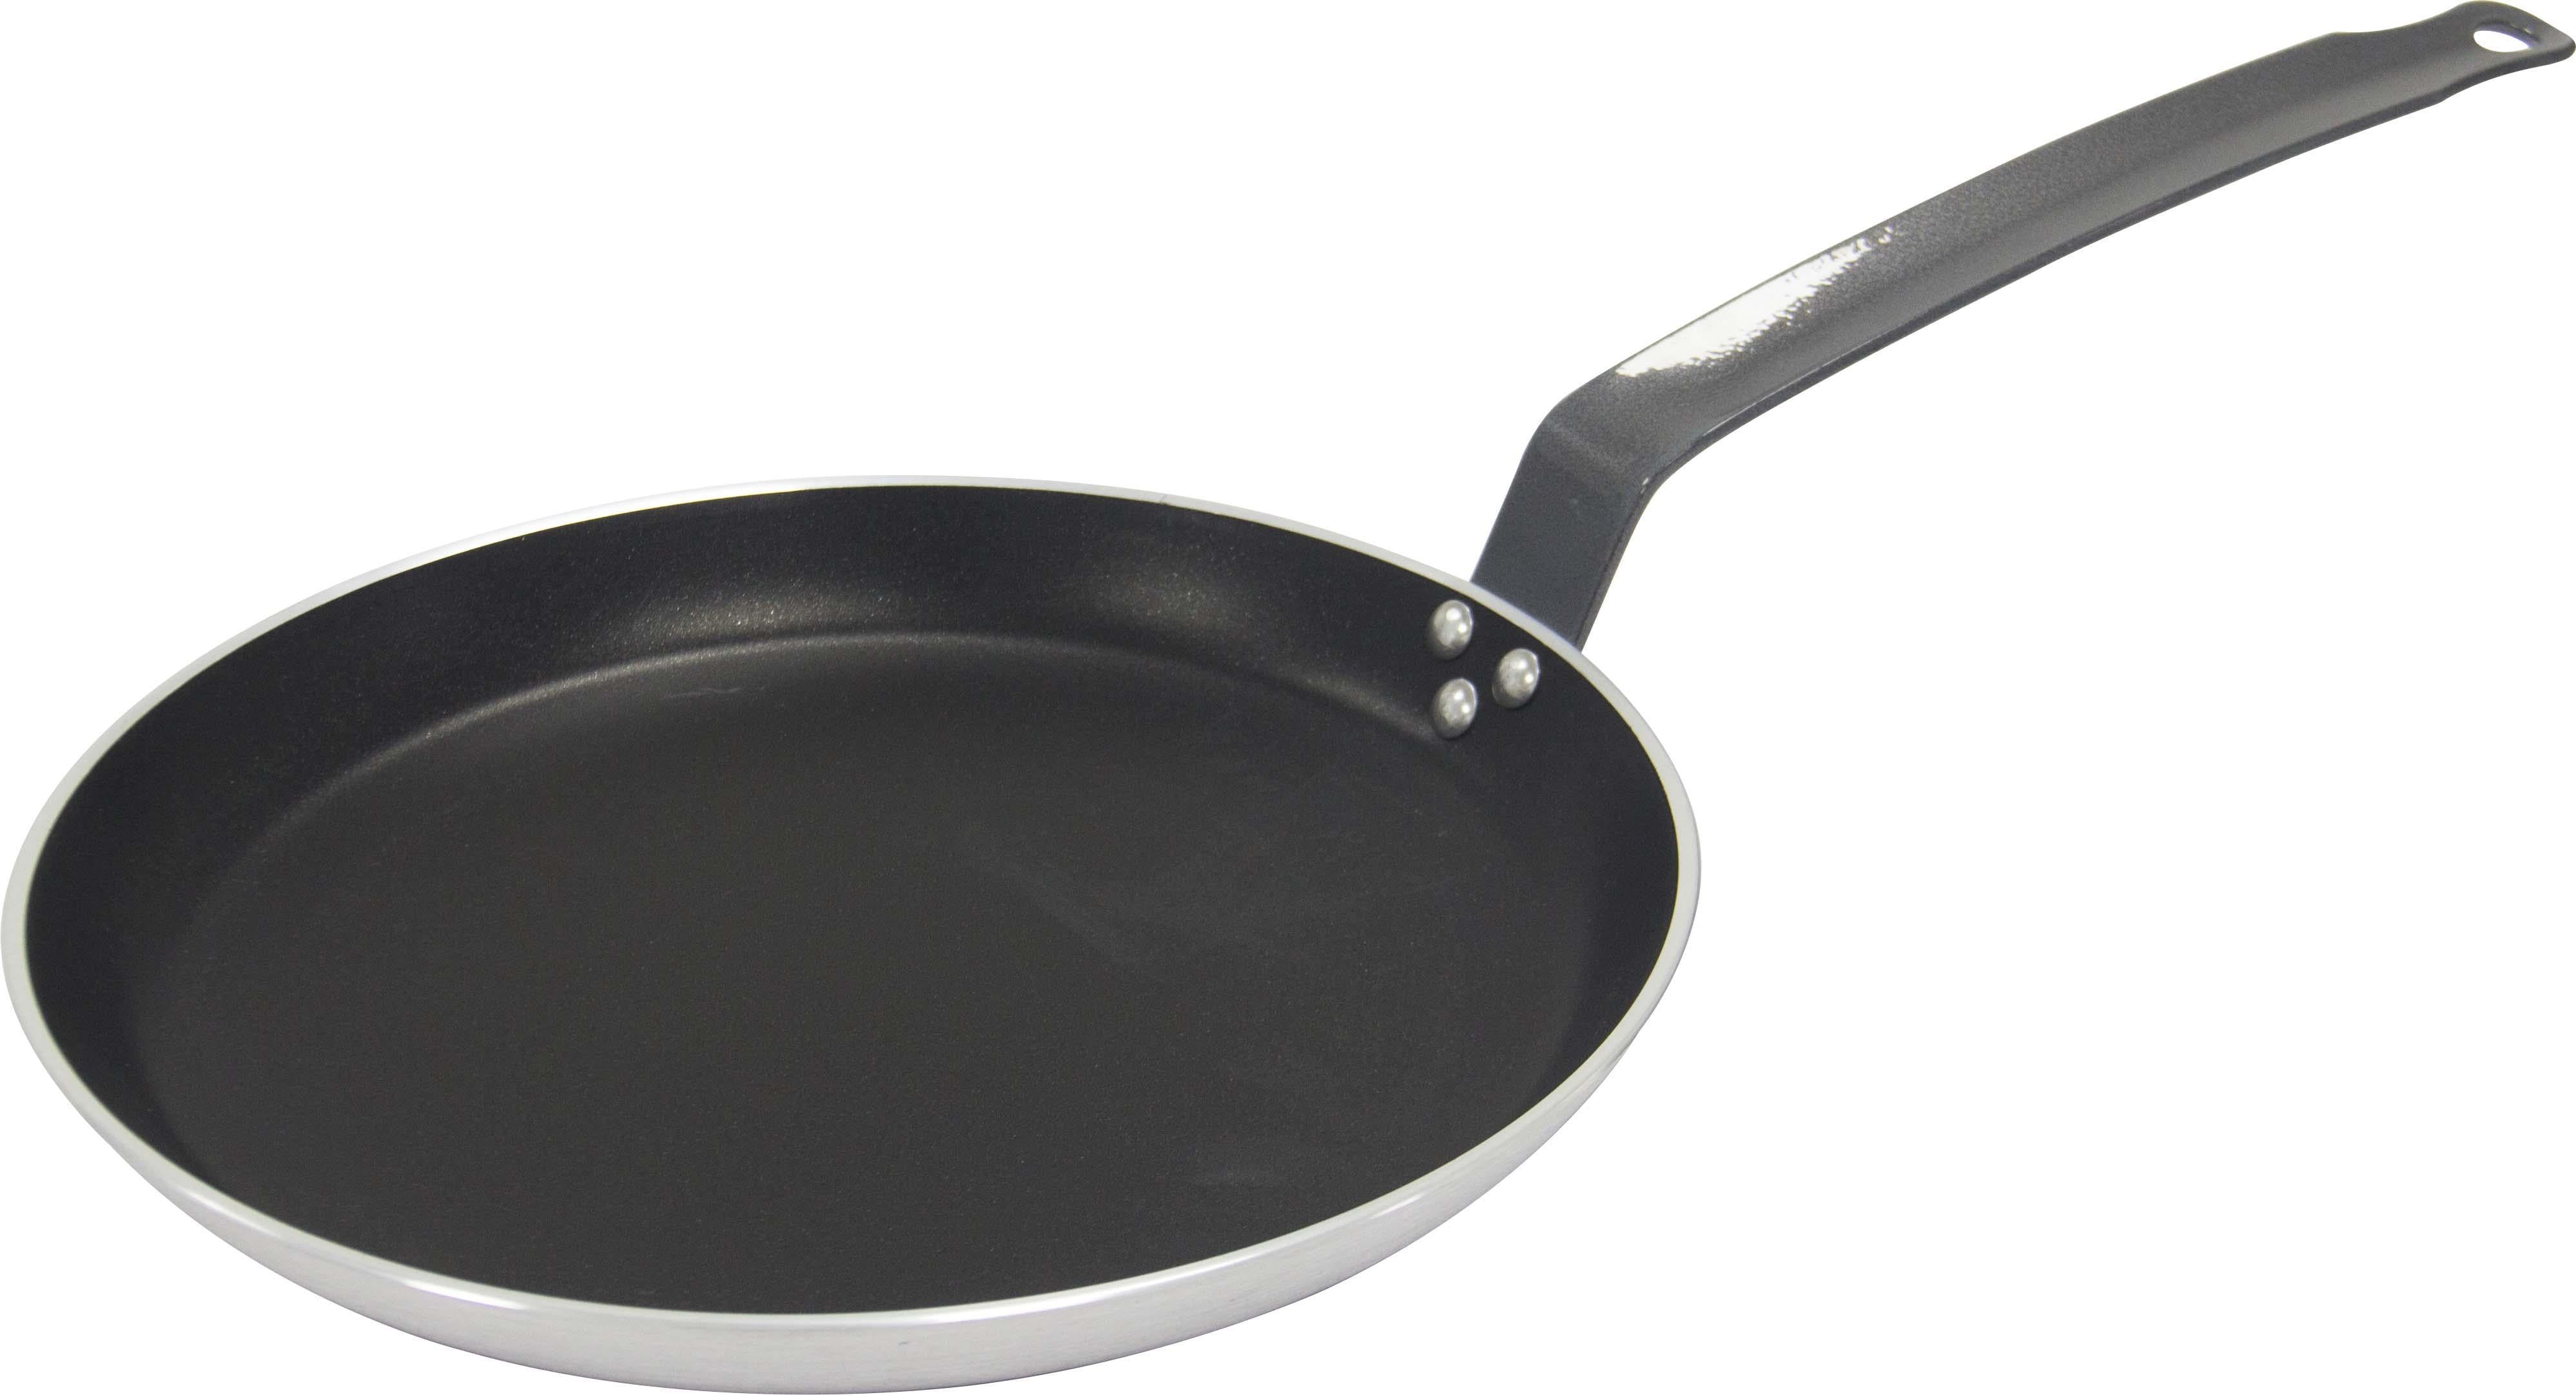 NEW CREPE PAN 30CM - Mabrook Hotel Supplies